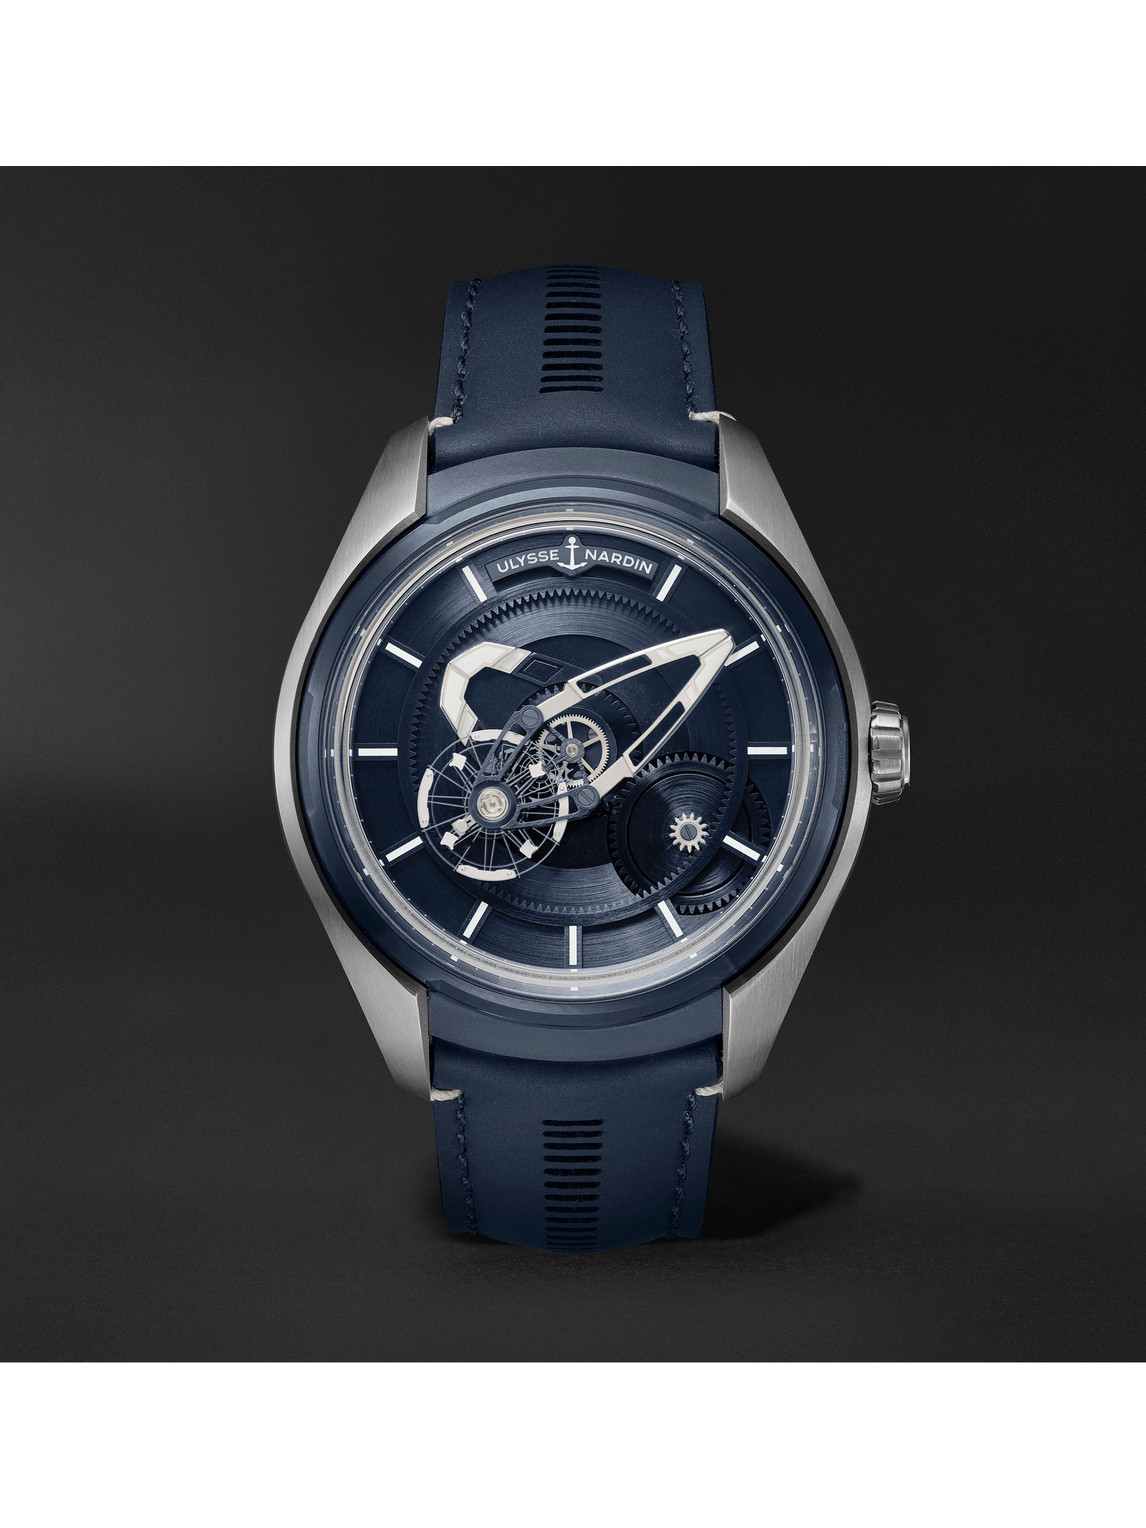 Ulysse Nardin Freak X Automatic 43mm Titanium And Leather Watch, Ref. No. 2303-270.1/03 In Blue